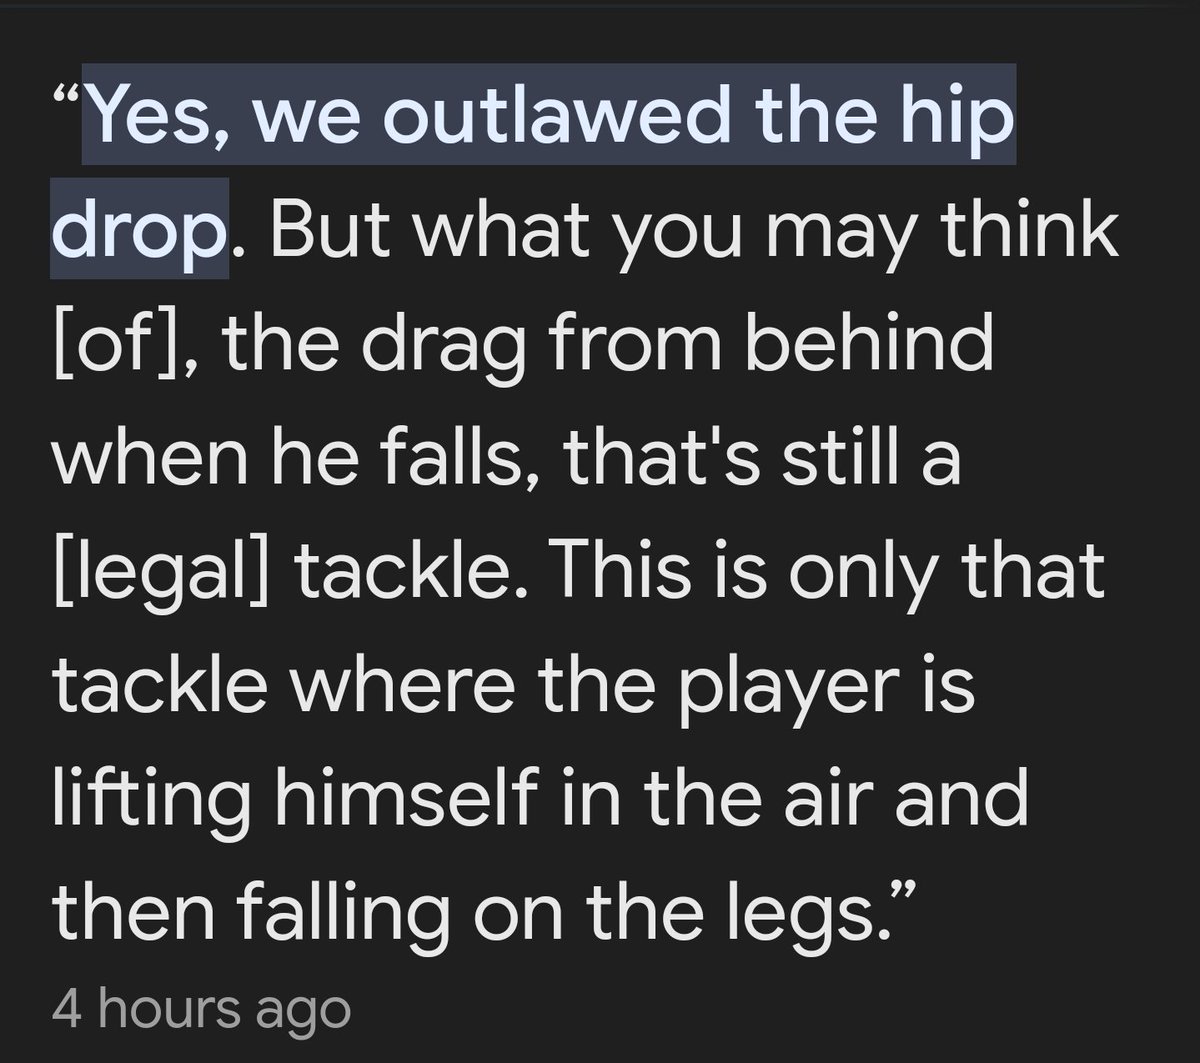 Some people are mad about the new hip drop tackle rule. It has some conditions...